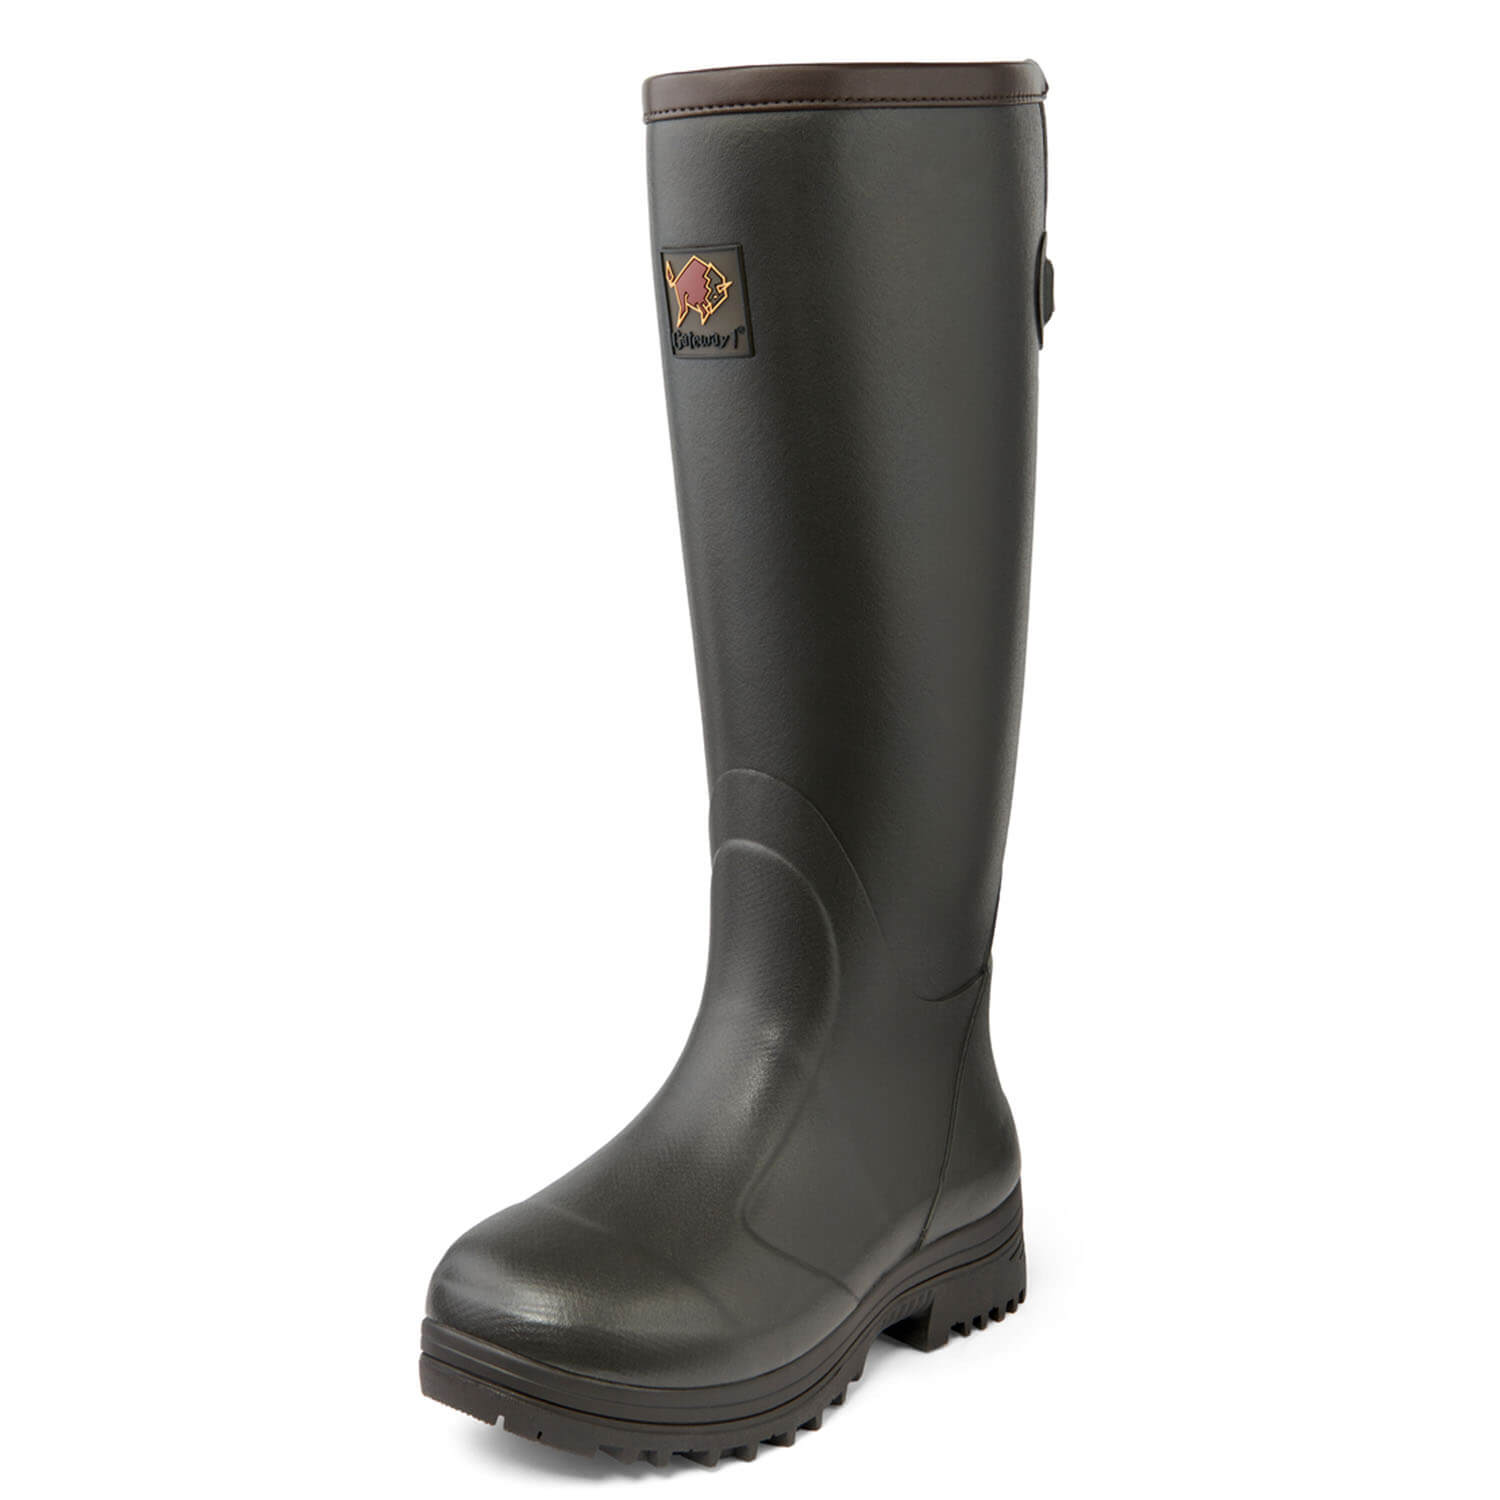 Gateway1 womens Rubber Boots Pheasant Game 17 5mm - Rubber Boots